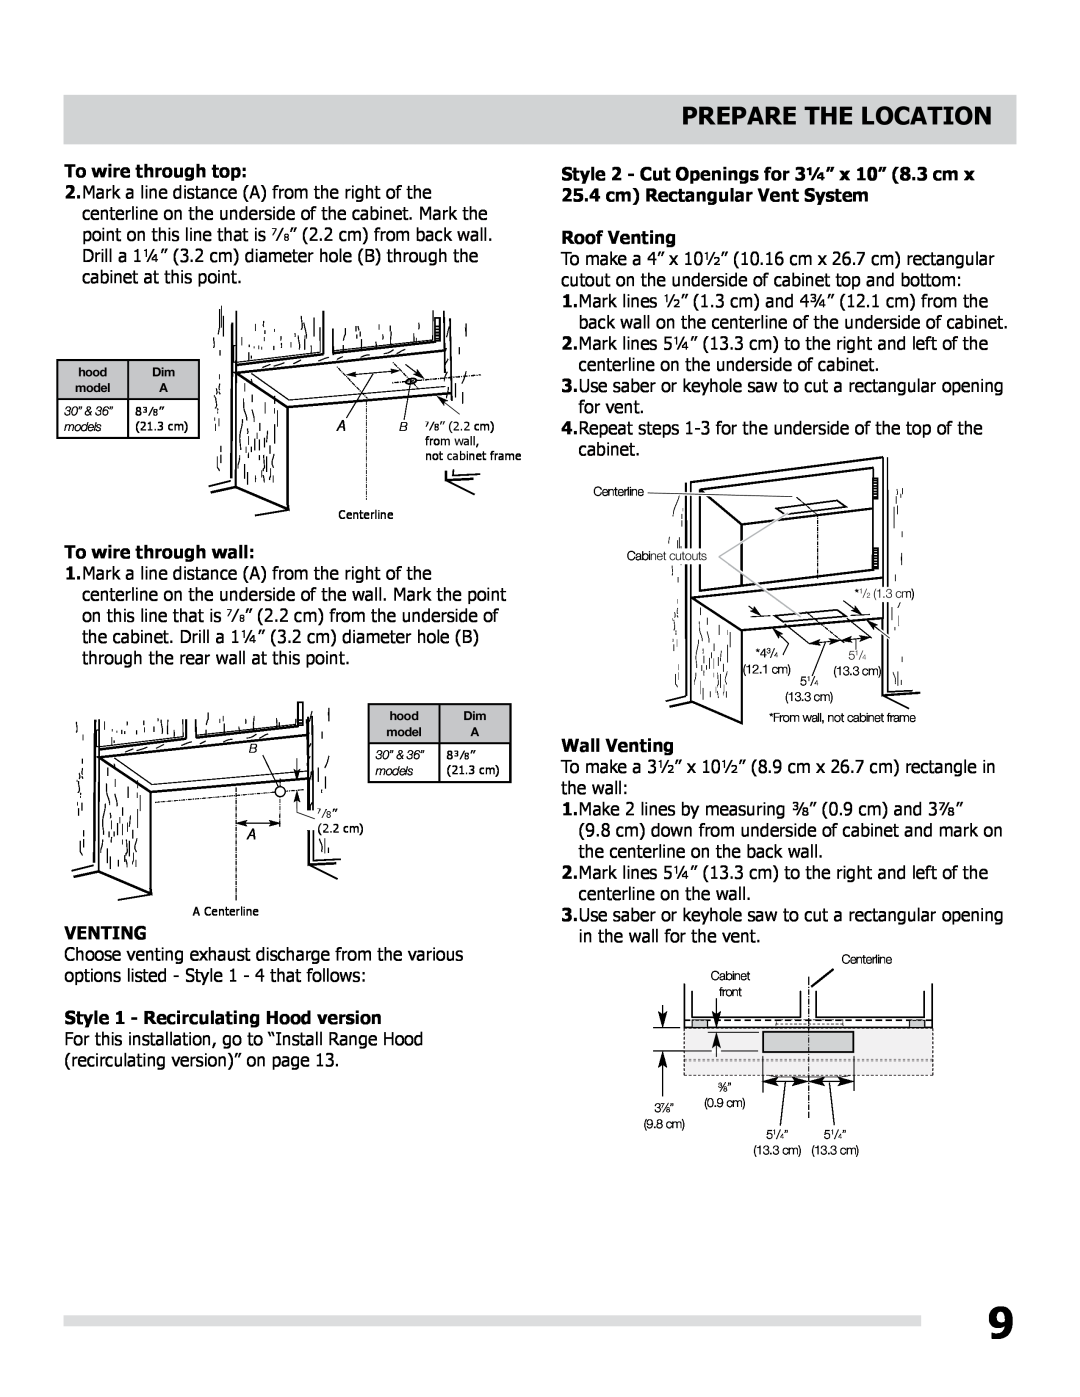 Frigidaire LI30MB manual To wire through top, Roof Venting, To wire through wall, Wall Venting, Prepare The Location 